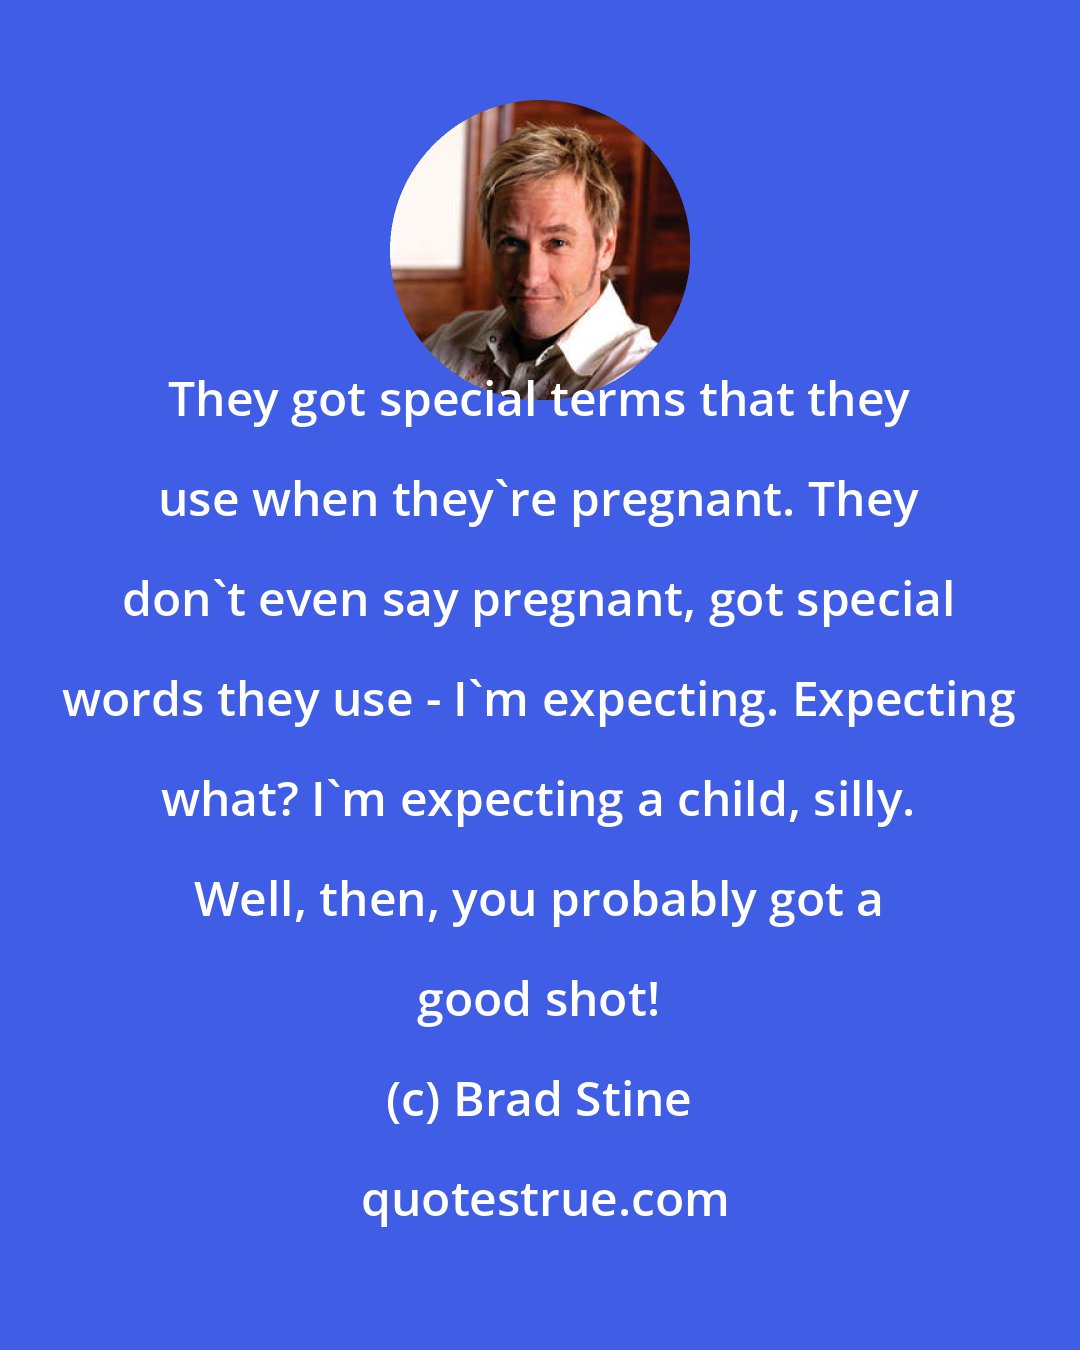 Brad Stine: They got special terms that they use when they're pregnant. They don't even say pregnant, got special words they use - I'm expecting. Expecting what? I'm expecting a child, silly. Well, then, you probably got a good shot!